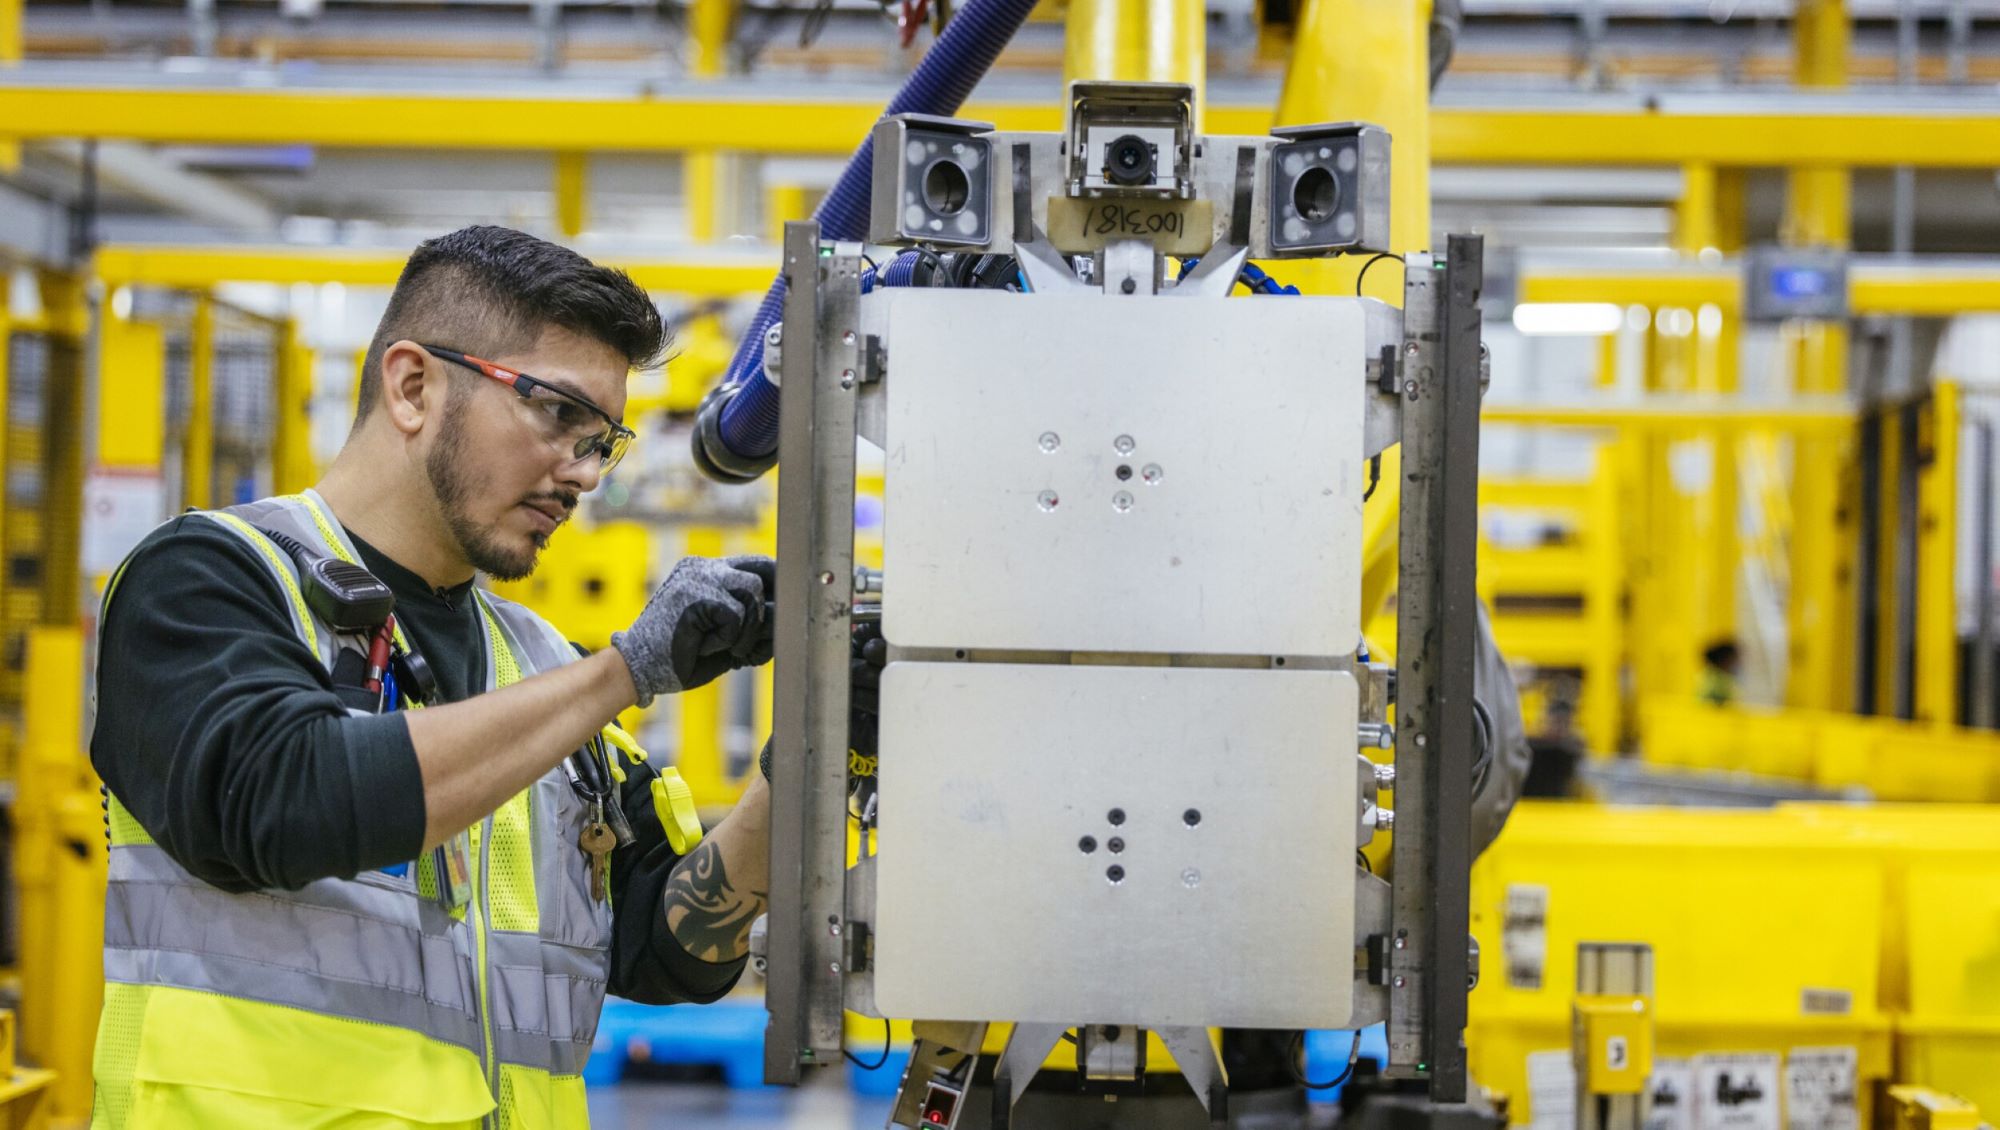 amazon-partners-with-mit-to-study-the-impact-of-robots-on-jobs